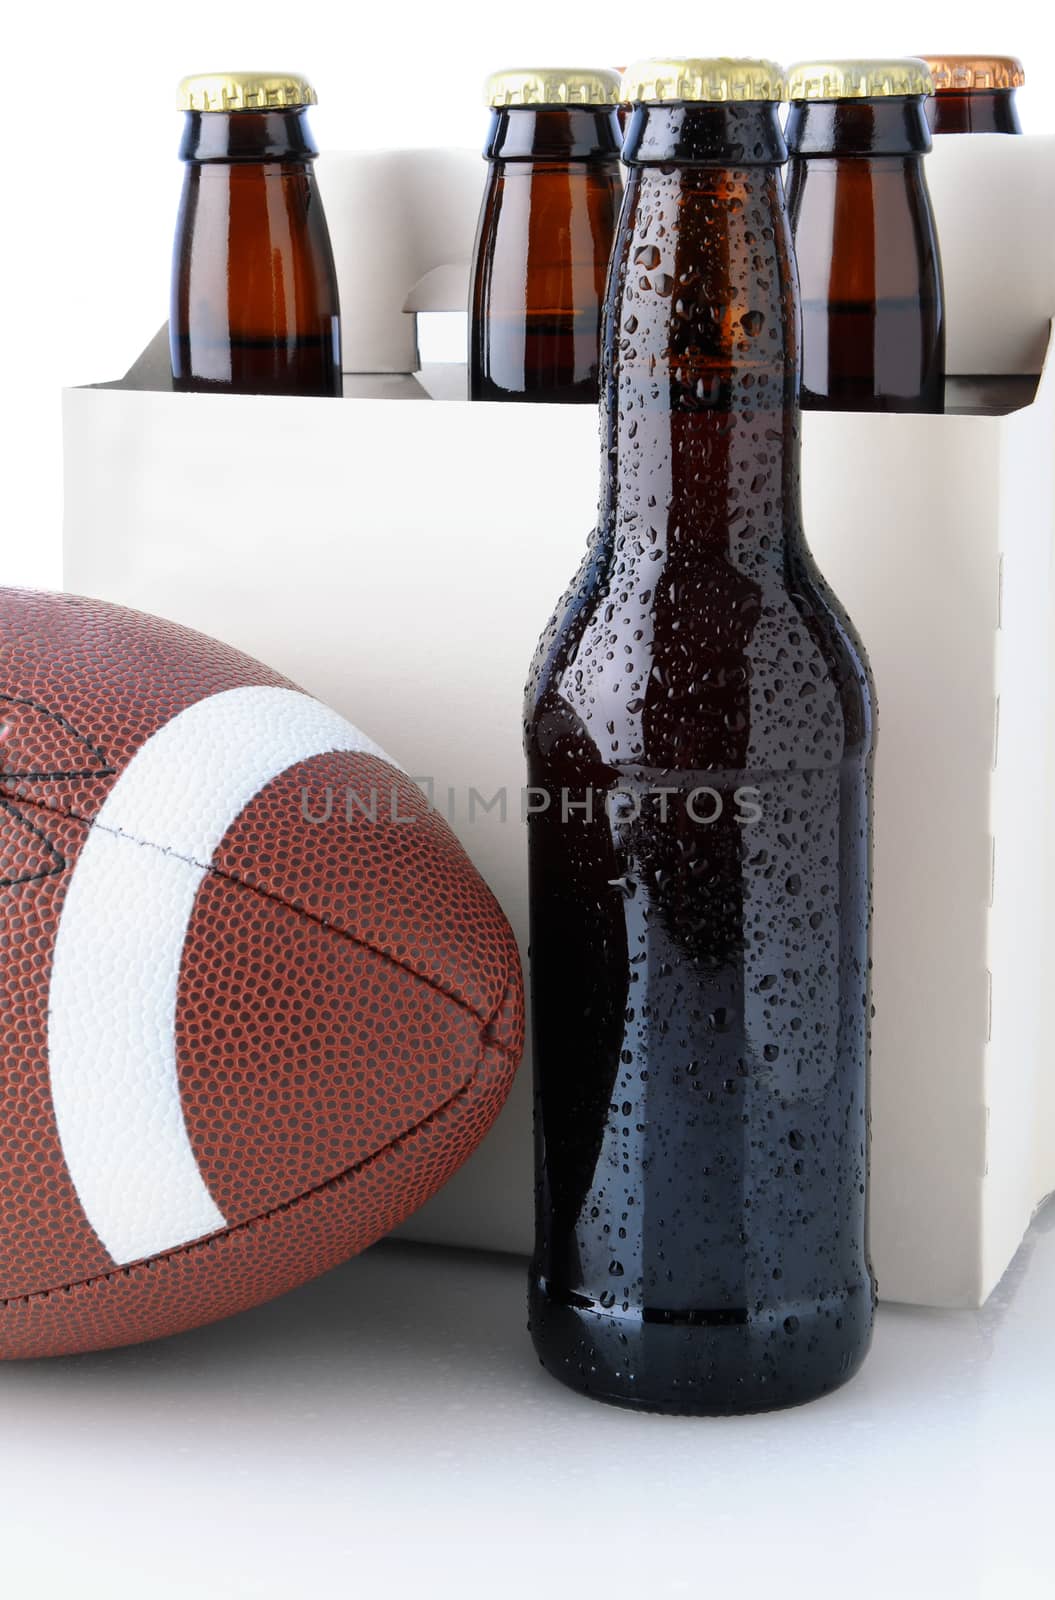 Beer Bottles with American Football by sCukrov